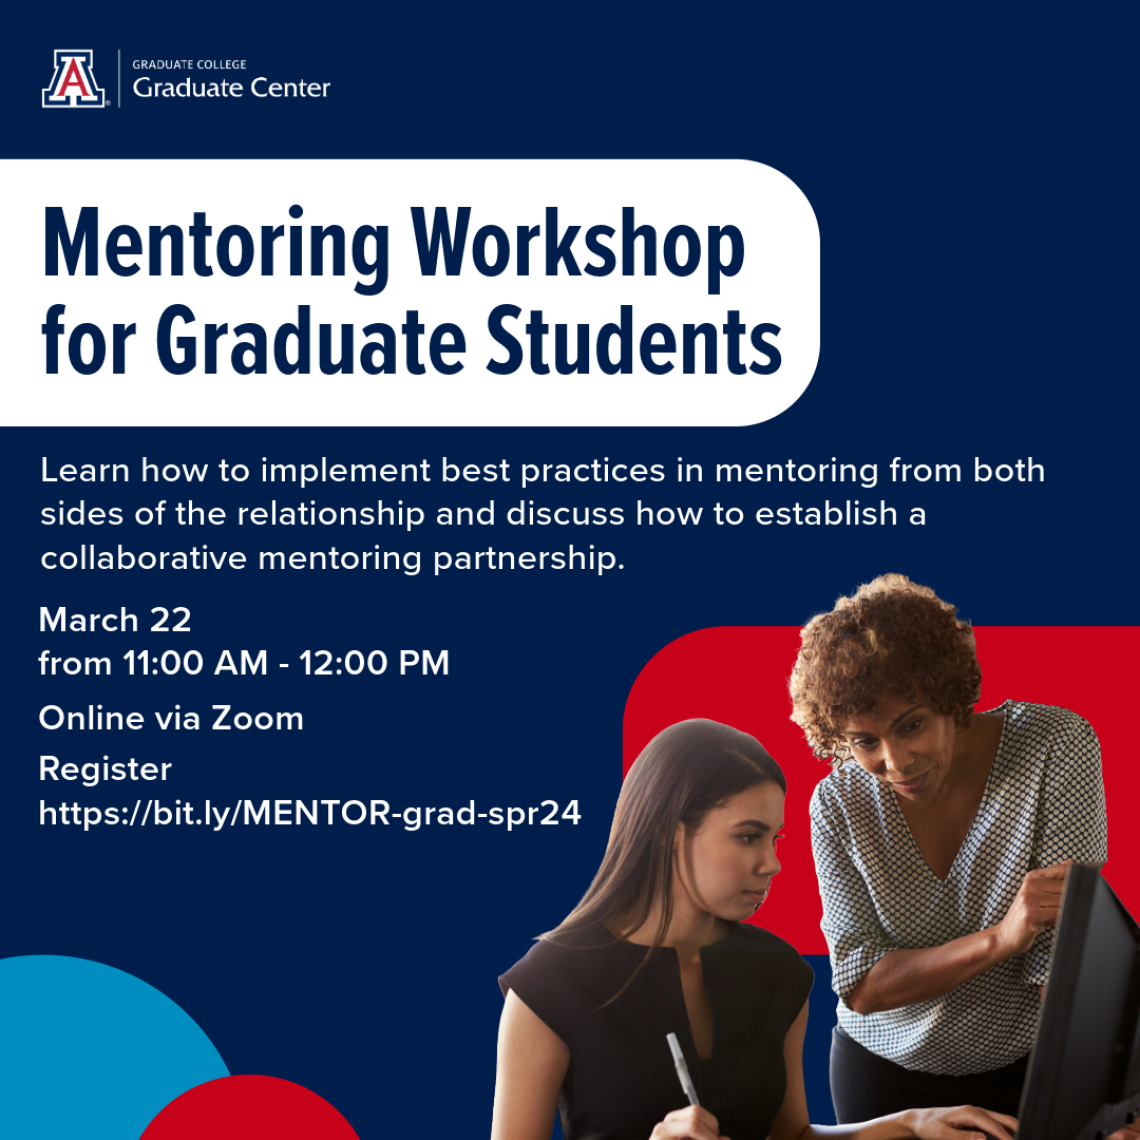 image with information regarding the mentoring workshop for graduate students. 